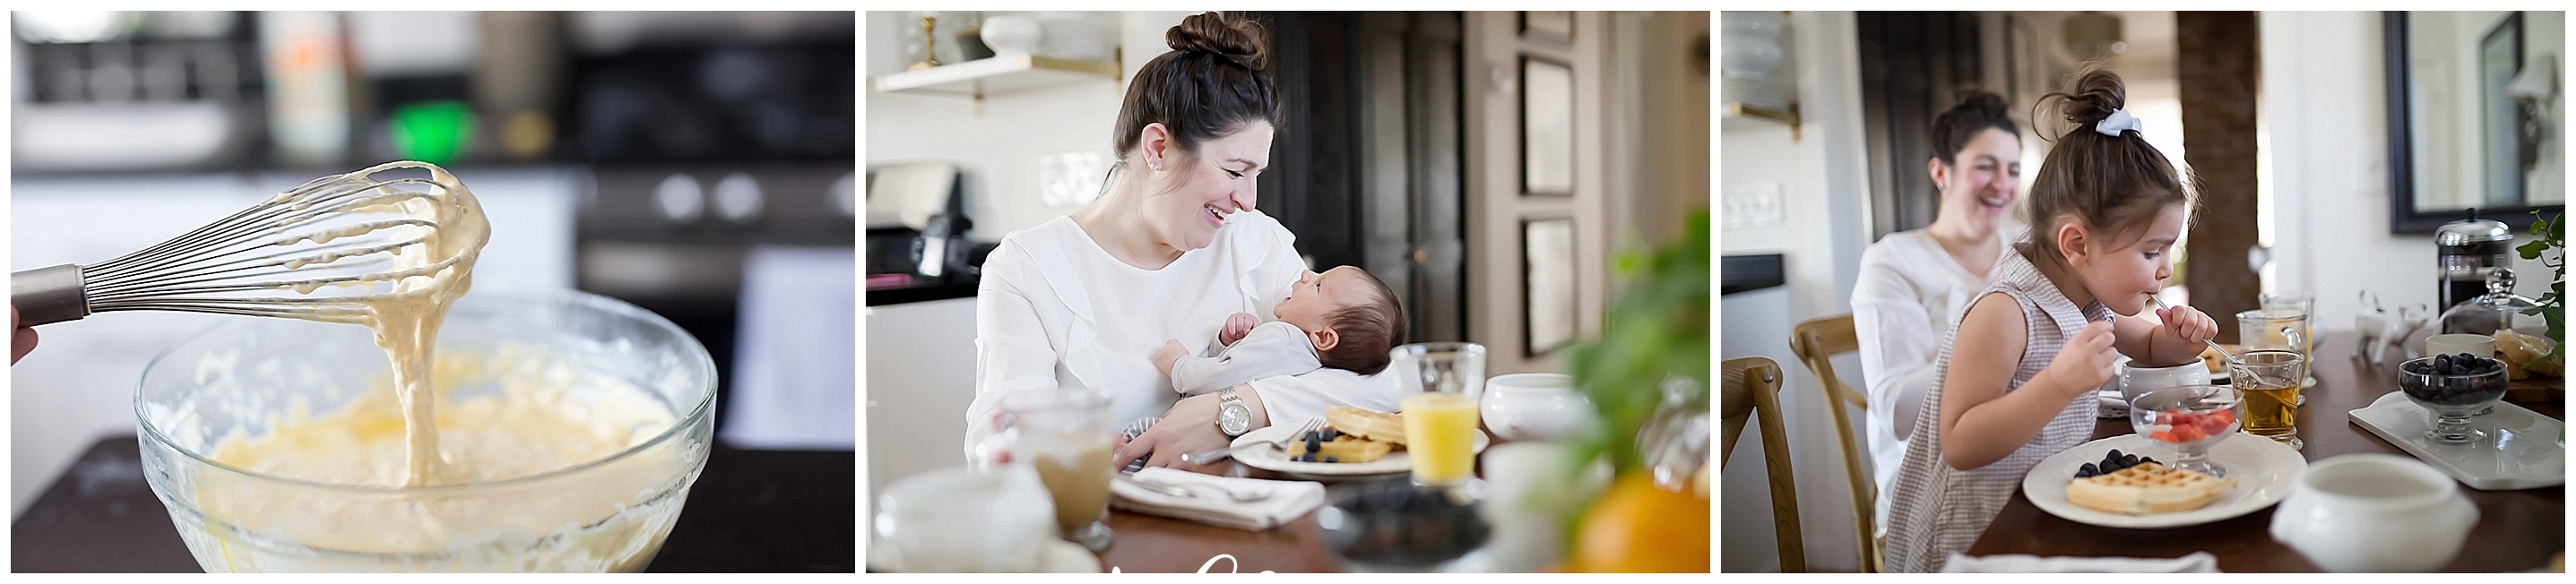 lifestyle-phtography-at-home-family-baby-breakfast_0086.jpg